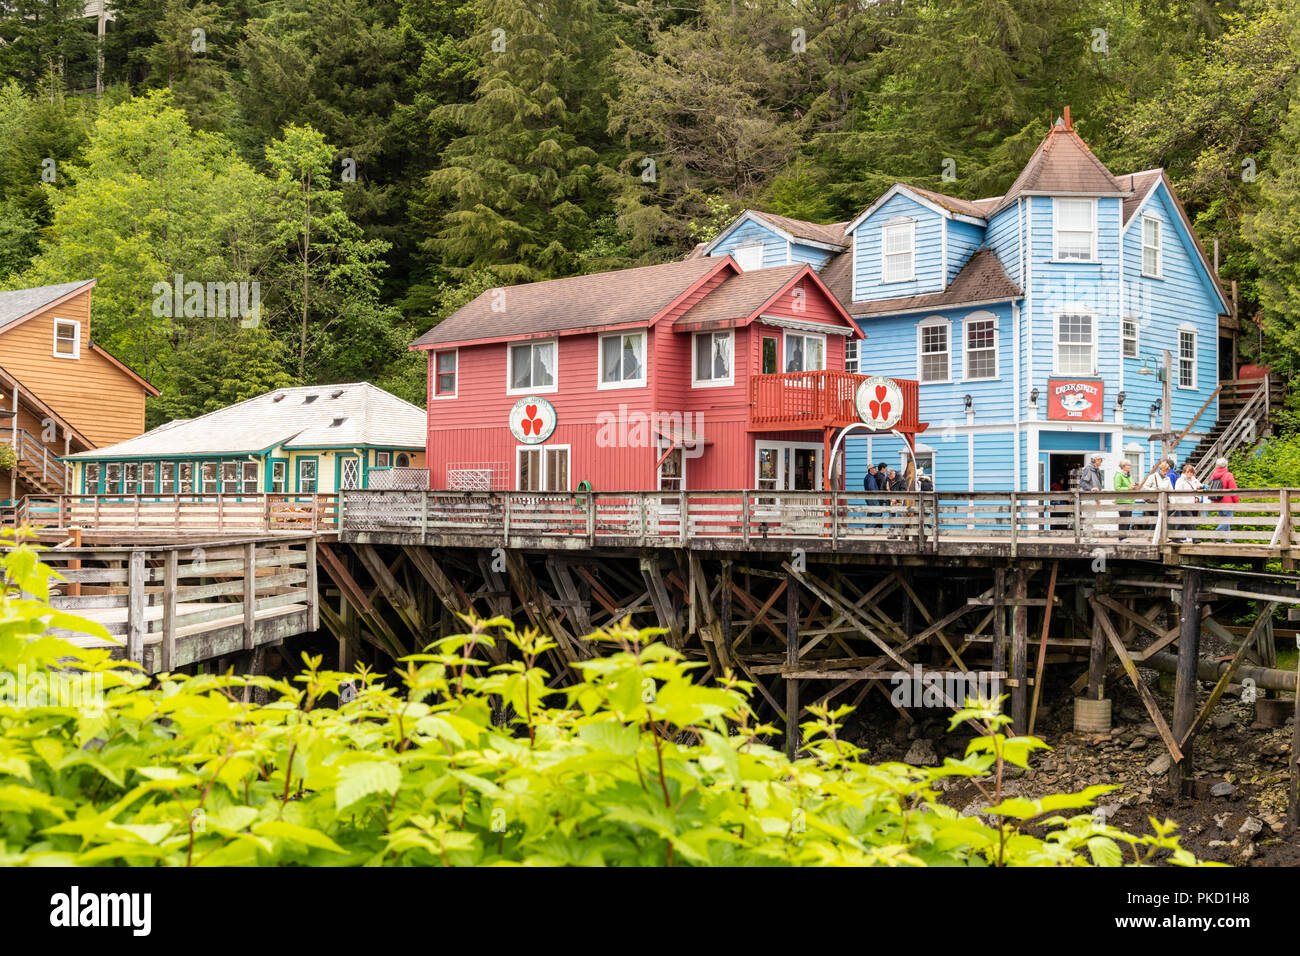 Some of the old timber houses in Creek Street built on stilts above the Ketchikan Creek in downtown Ketchikan, Alaska USA Stock Photo